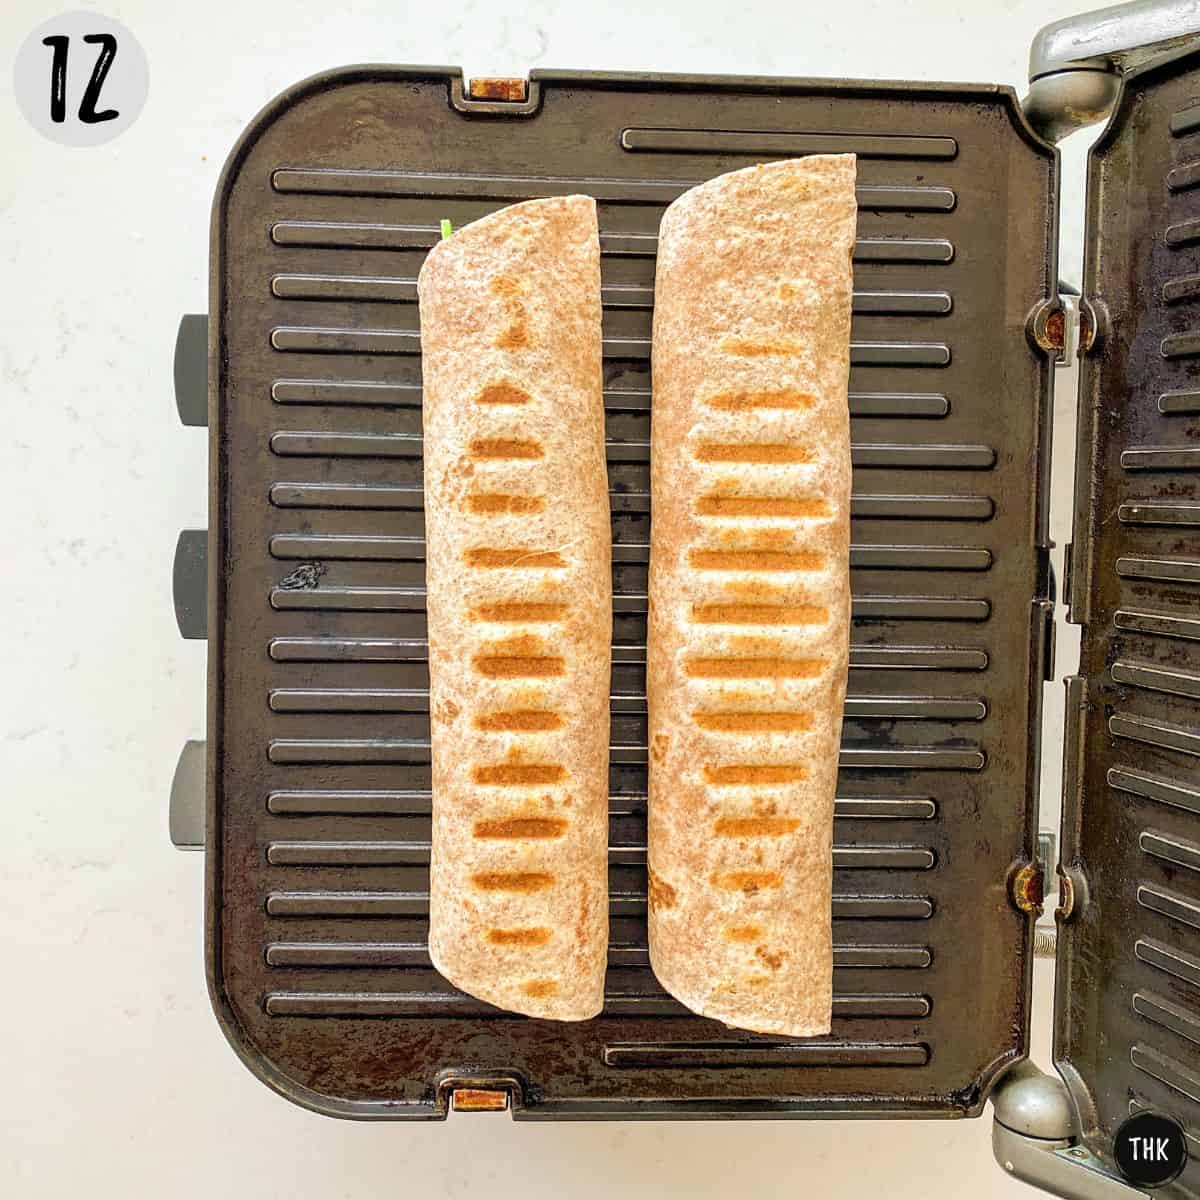 Two tortilla rolls on panini press with grill lines on them.